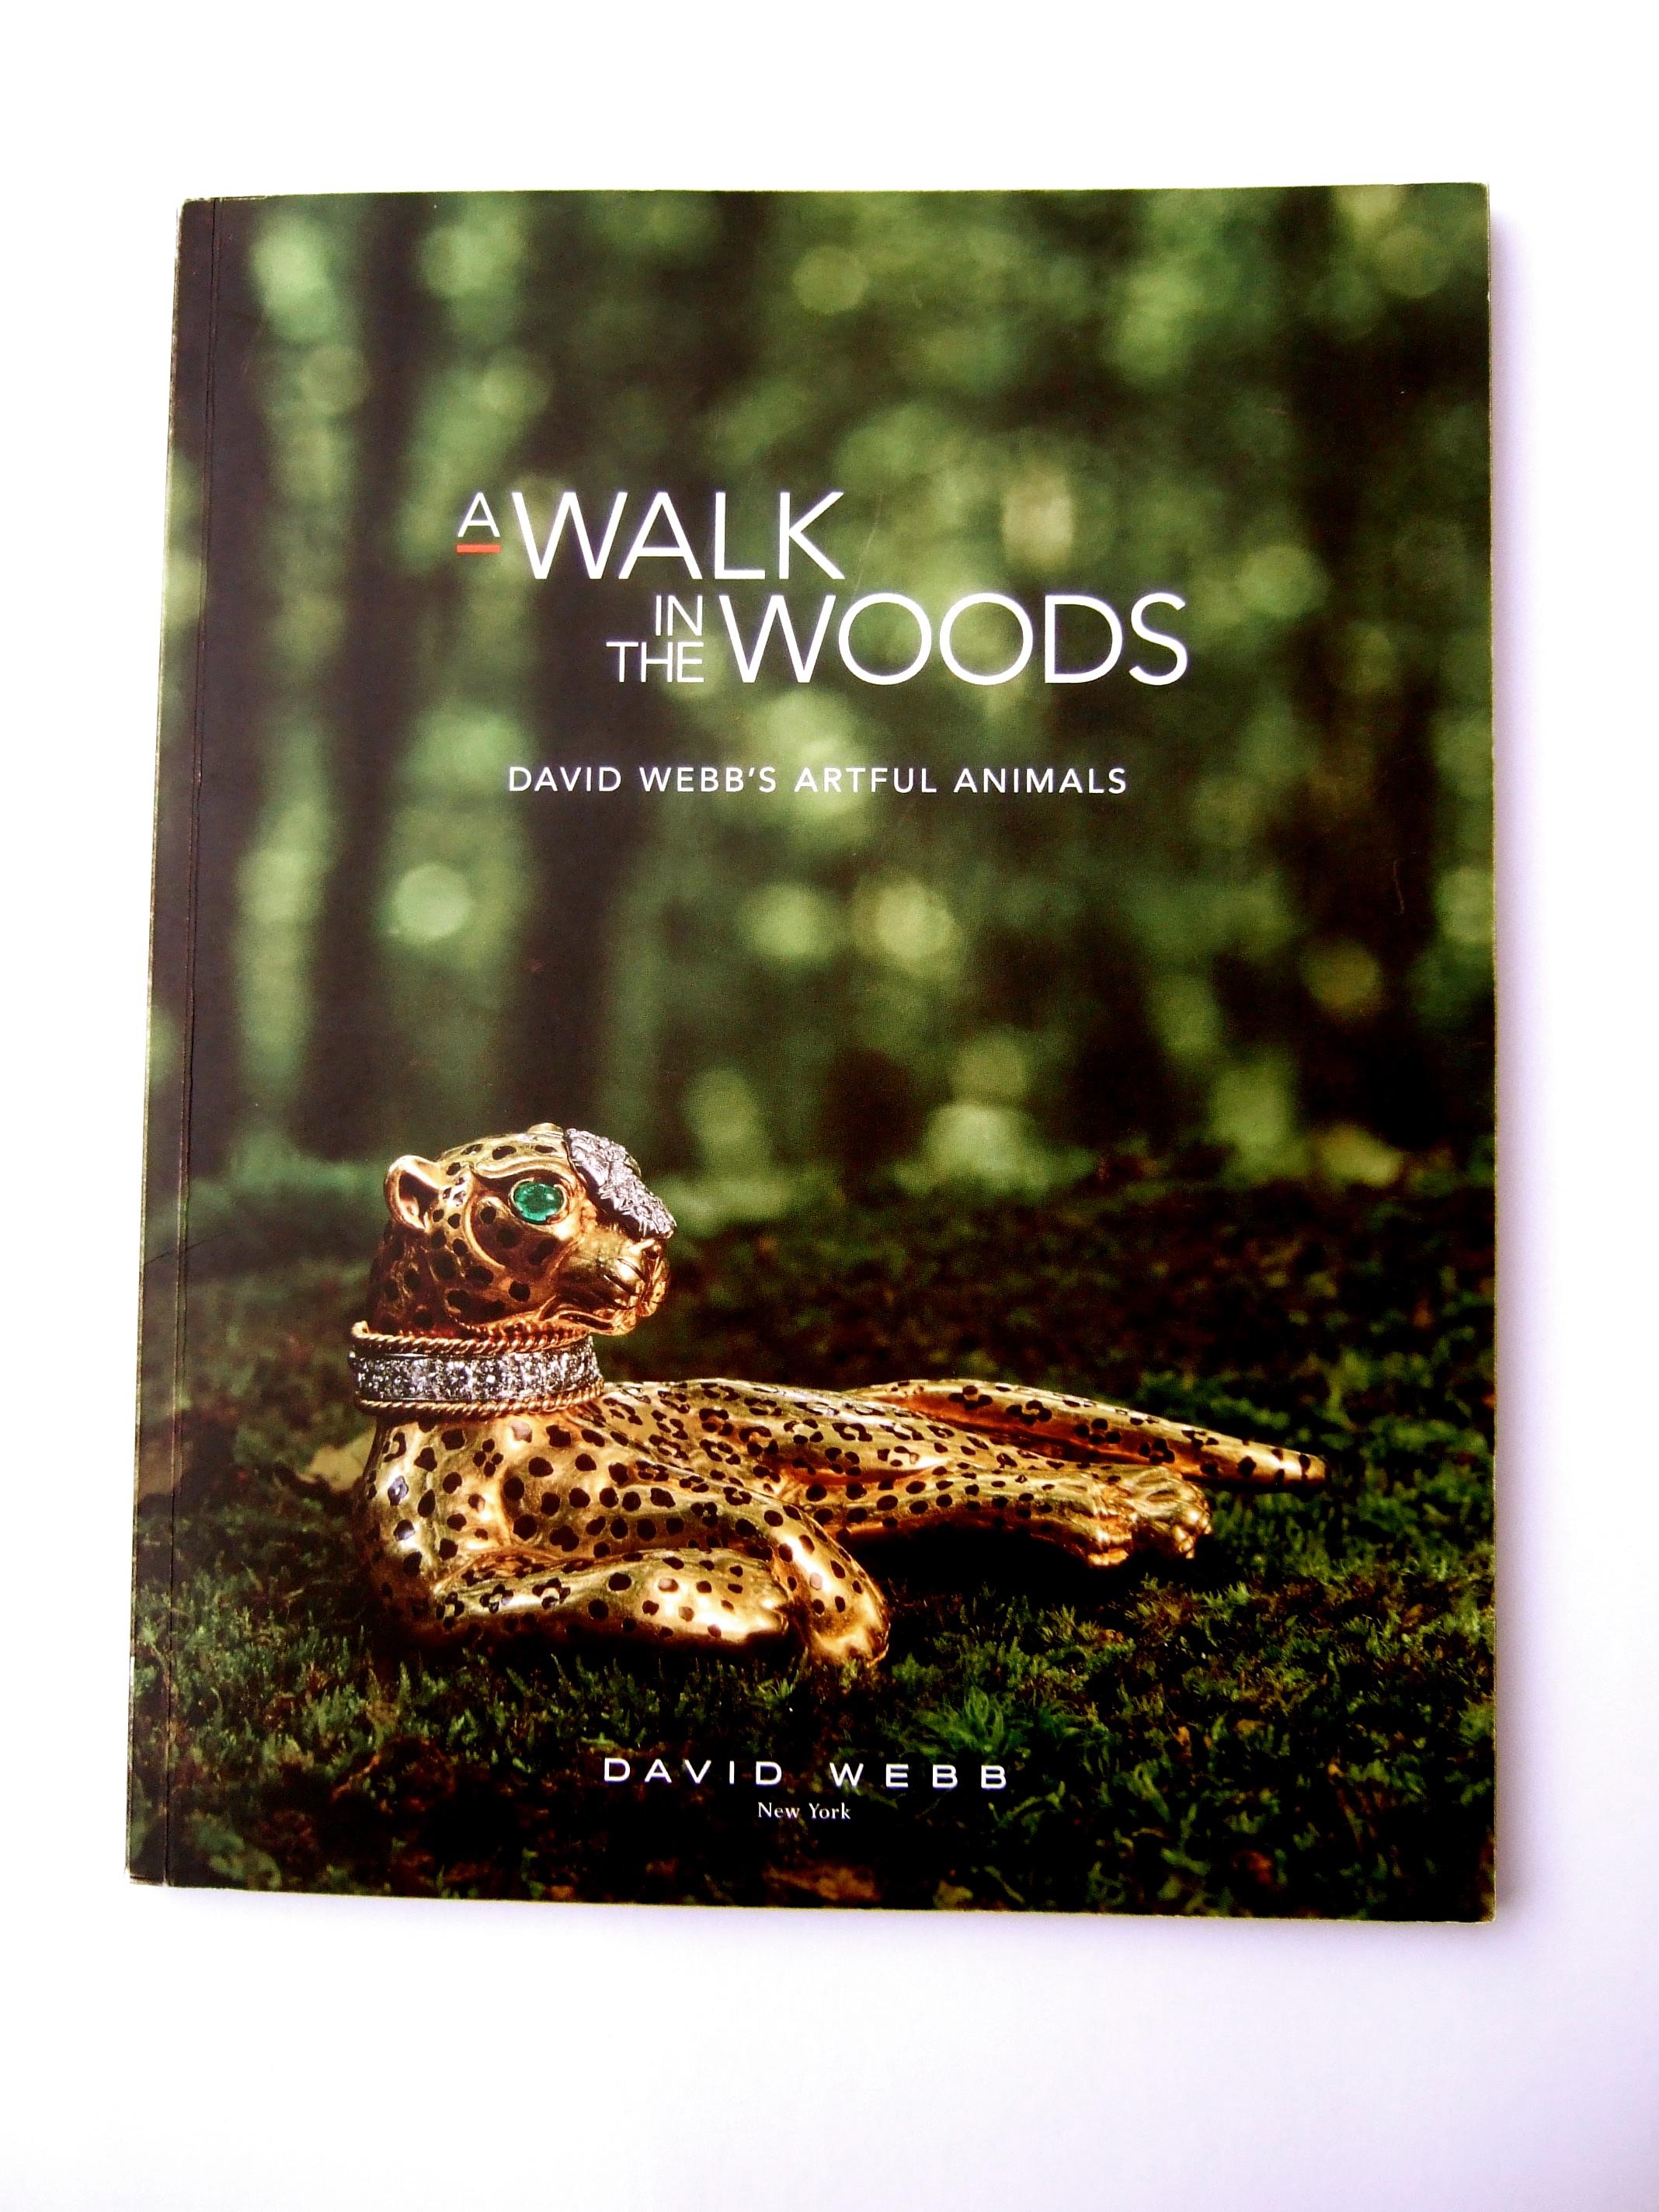 David Webb's A Walk in the Woods Artful Animals Soft Cover Pamphlet  Exhibition Book c 2022
The soft cover brochure book was from a 2022  David Webb exhibition 
featuring an archive of Webb's extraordinary animal jewelry designs

The soft cover